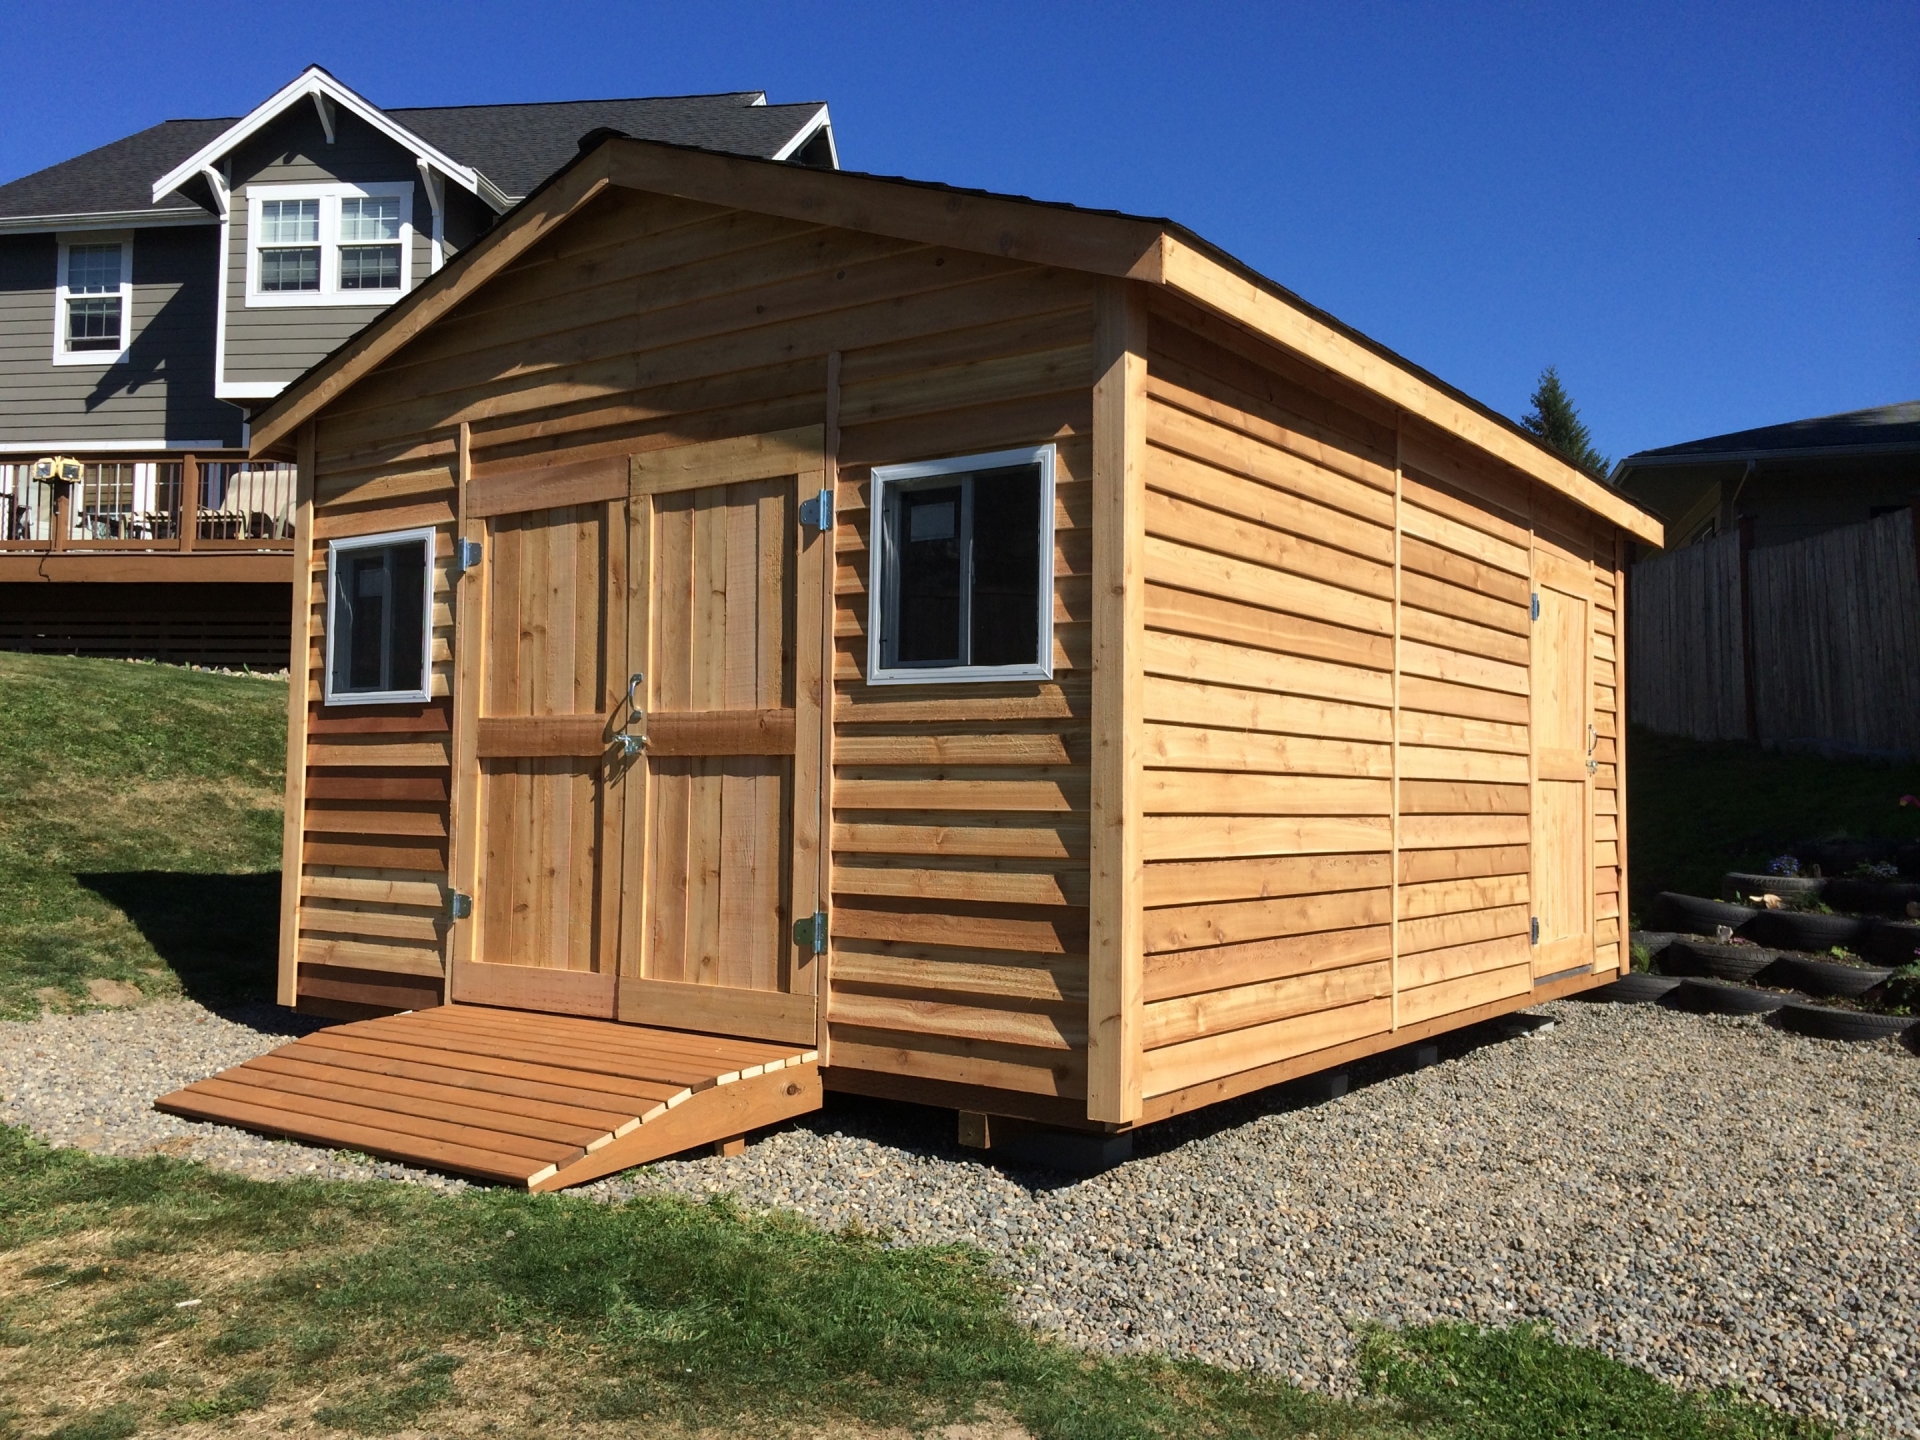 Pictures Of Storage Sheds / New Modern Storage Sheds Unveiled by Sheds